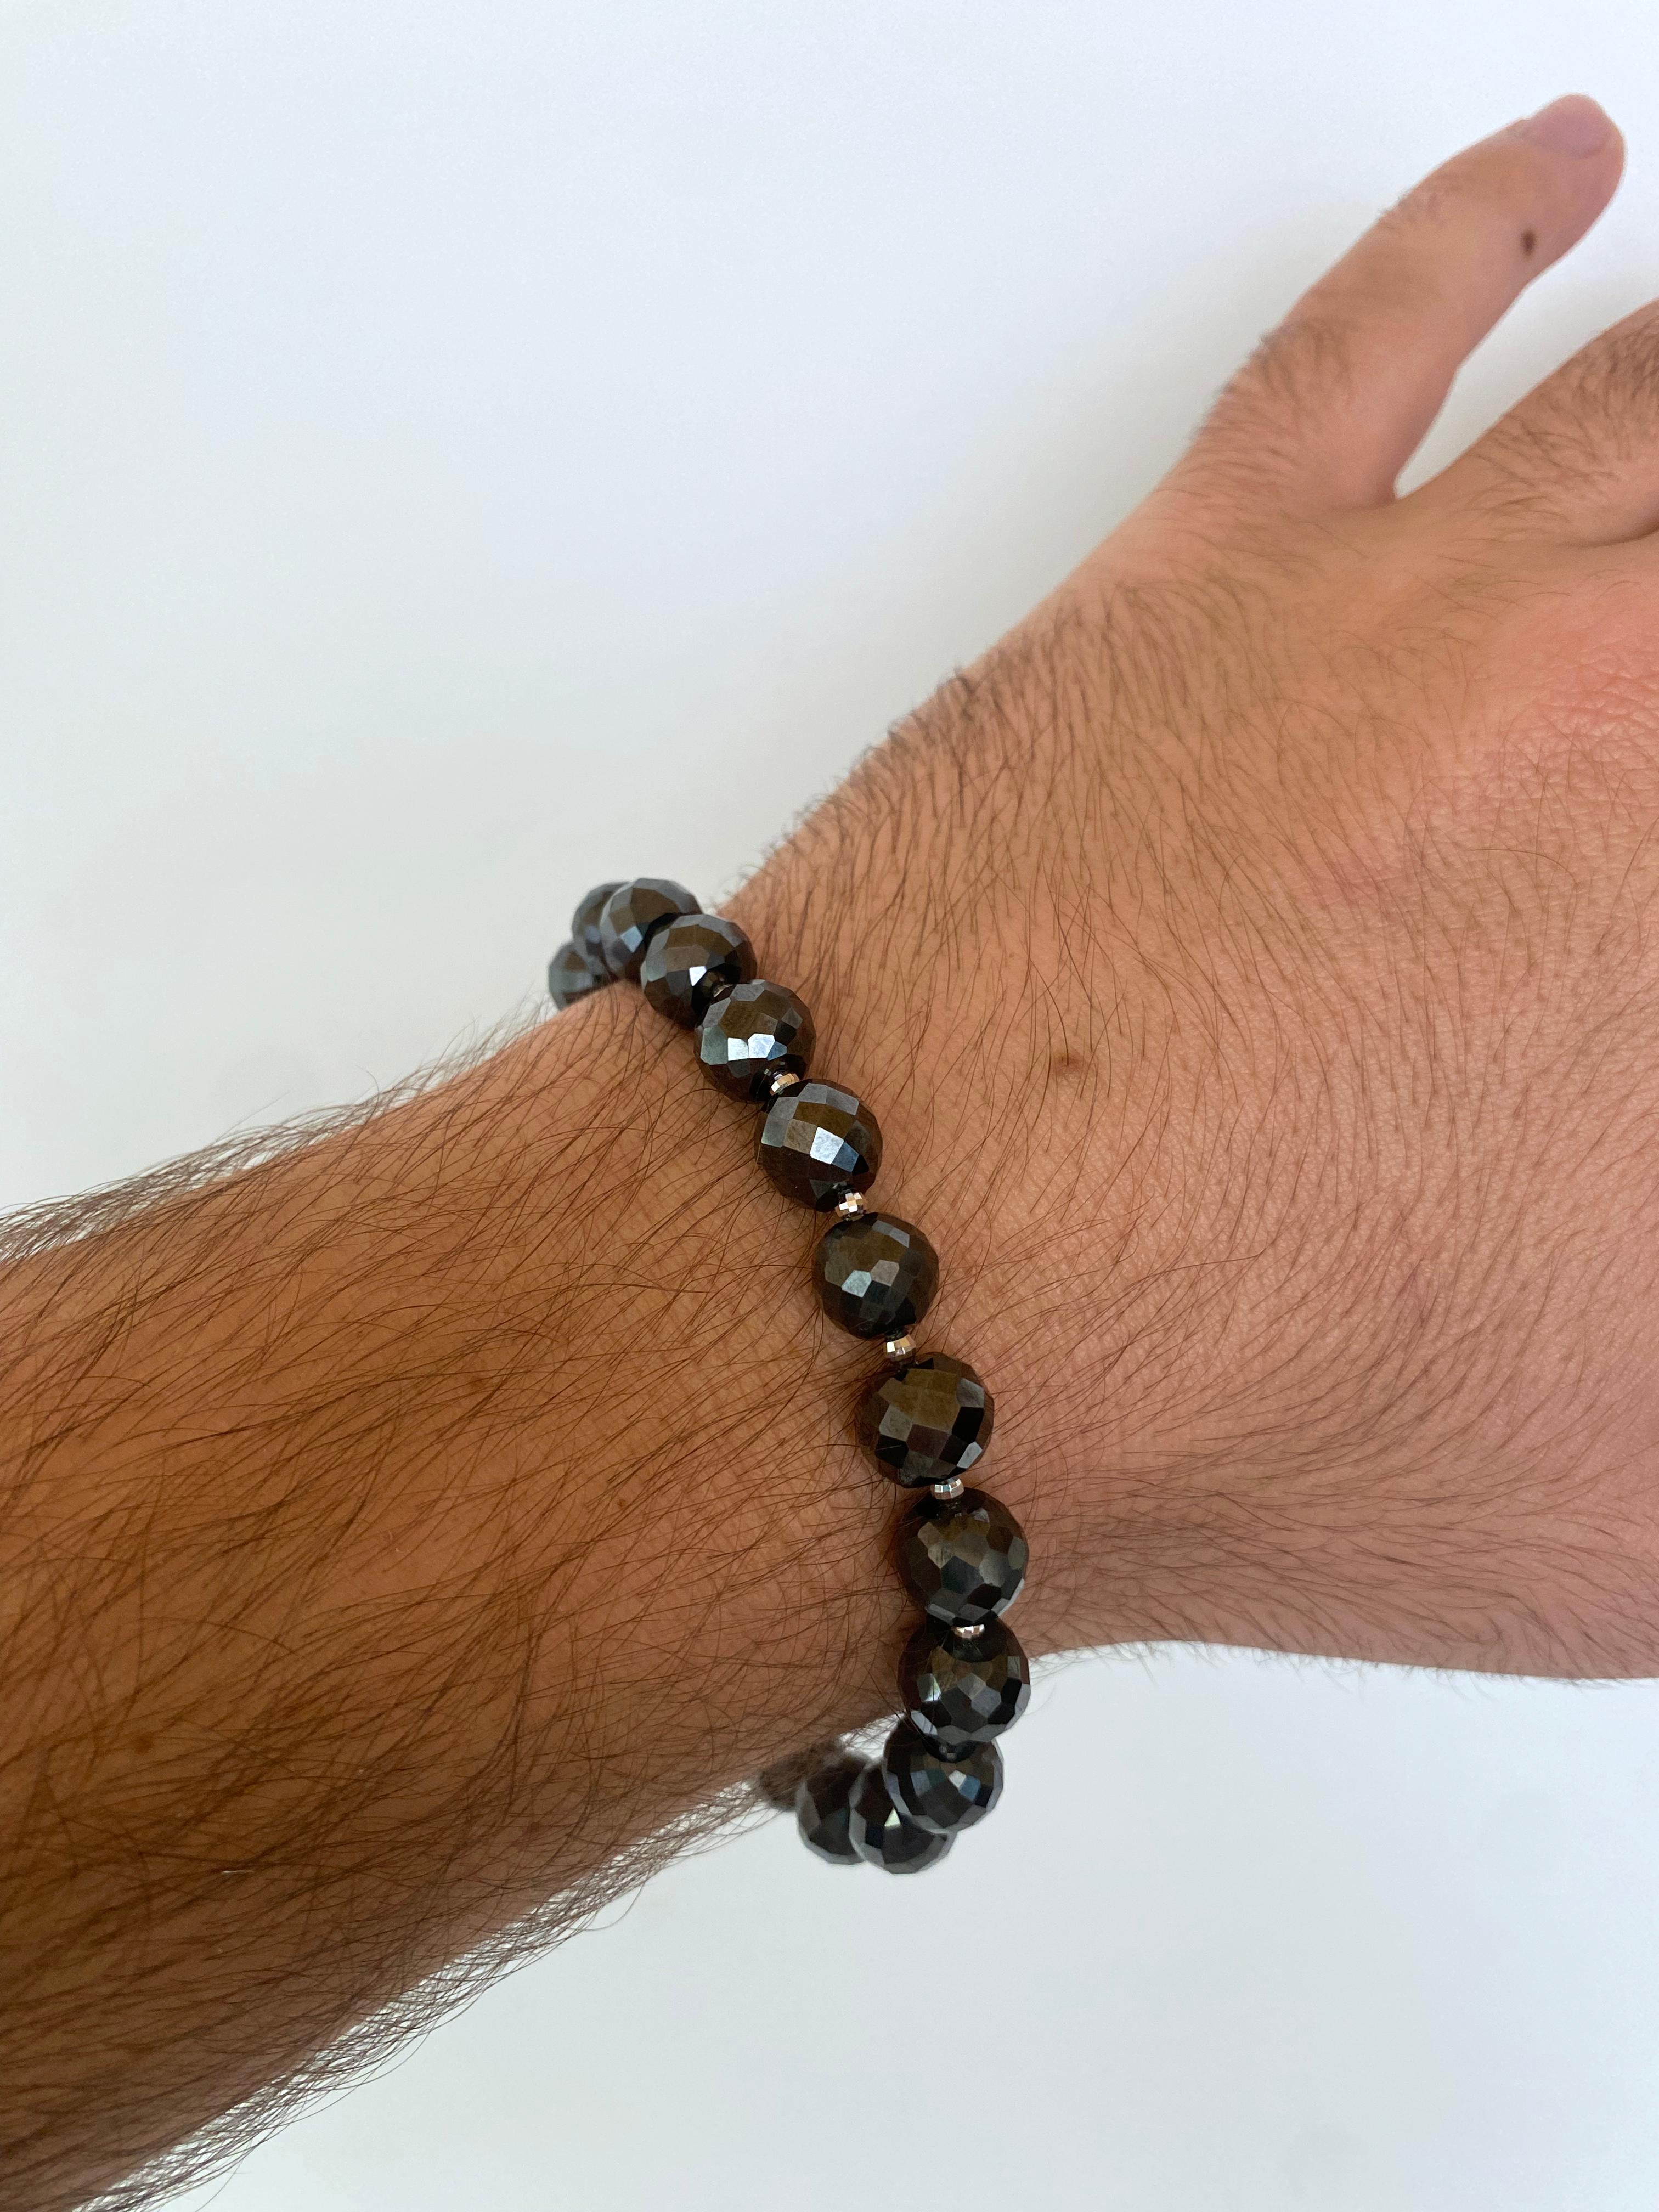 Men's Bracelet by Marina J. This piece is made with all faceted and alternating stones featuring Black Spinel and small 925 Silver - Rhodium plated beads. The faceted Black Spinel display a soft dark luster while delivering a thunderous shine. The